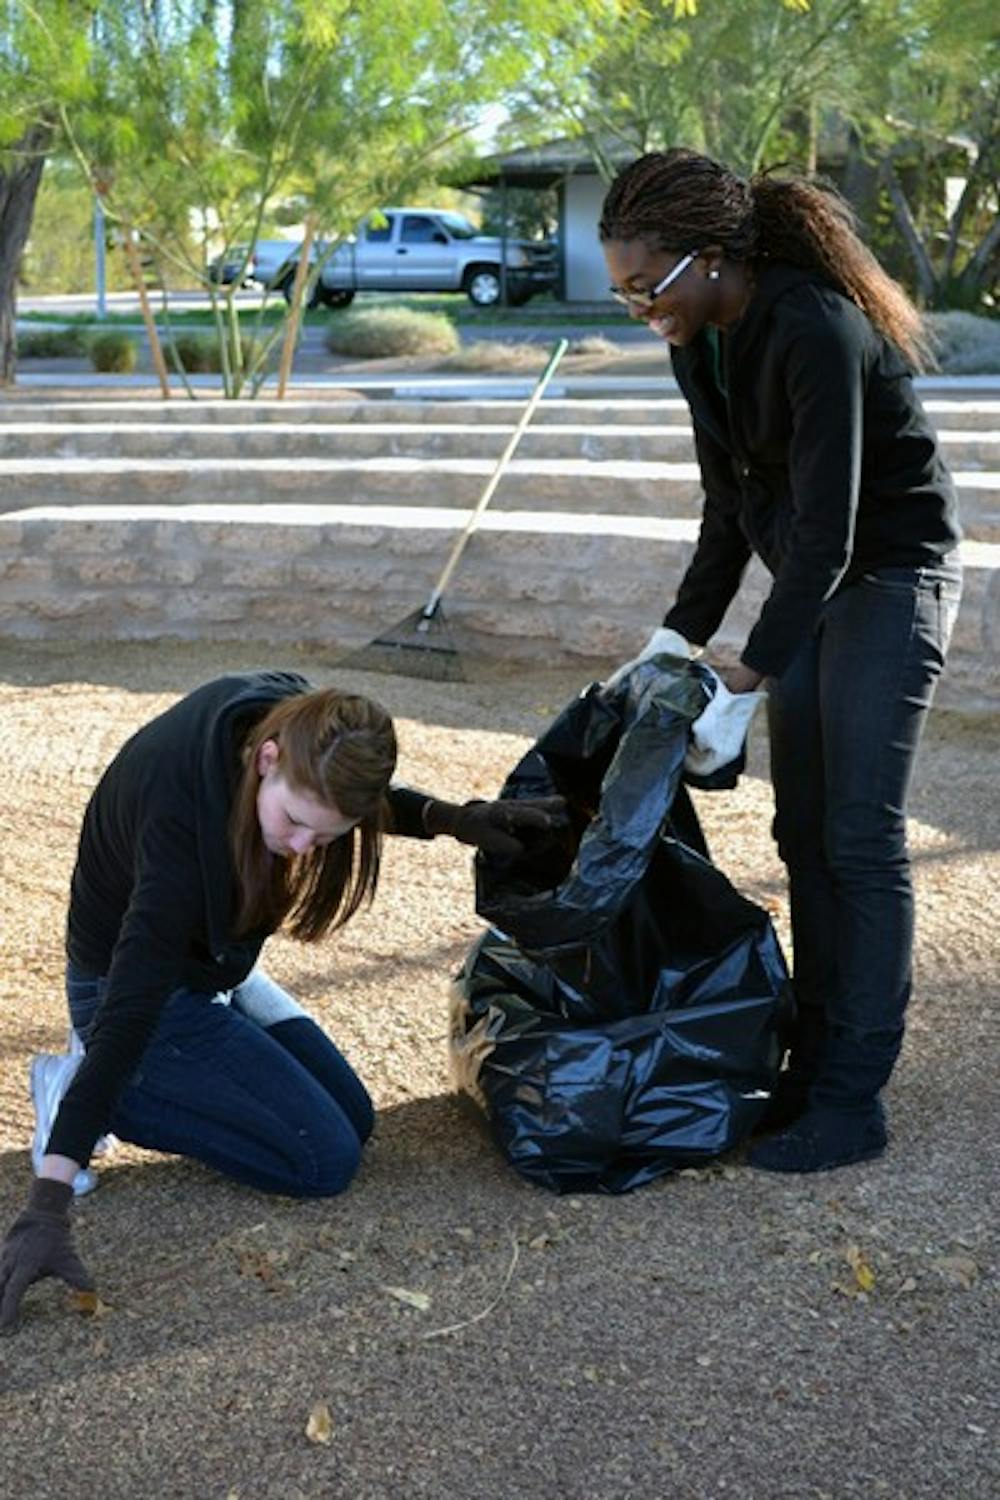 Global studies senior Dilim Dieke holds a trash bag for ASU alumna Renee Firing as they clean up leaves and twigs from Hudson Park in Tempe. Off-campus ministry group The Faithful City brought volunteers to the park Saturday morning to help clean up fallen leaves and trash.  (Photo by Mackenzie McCreary)